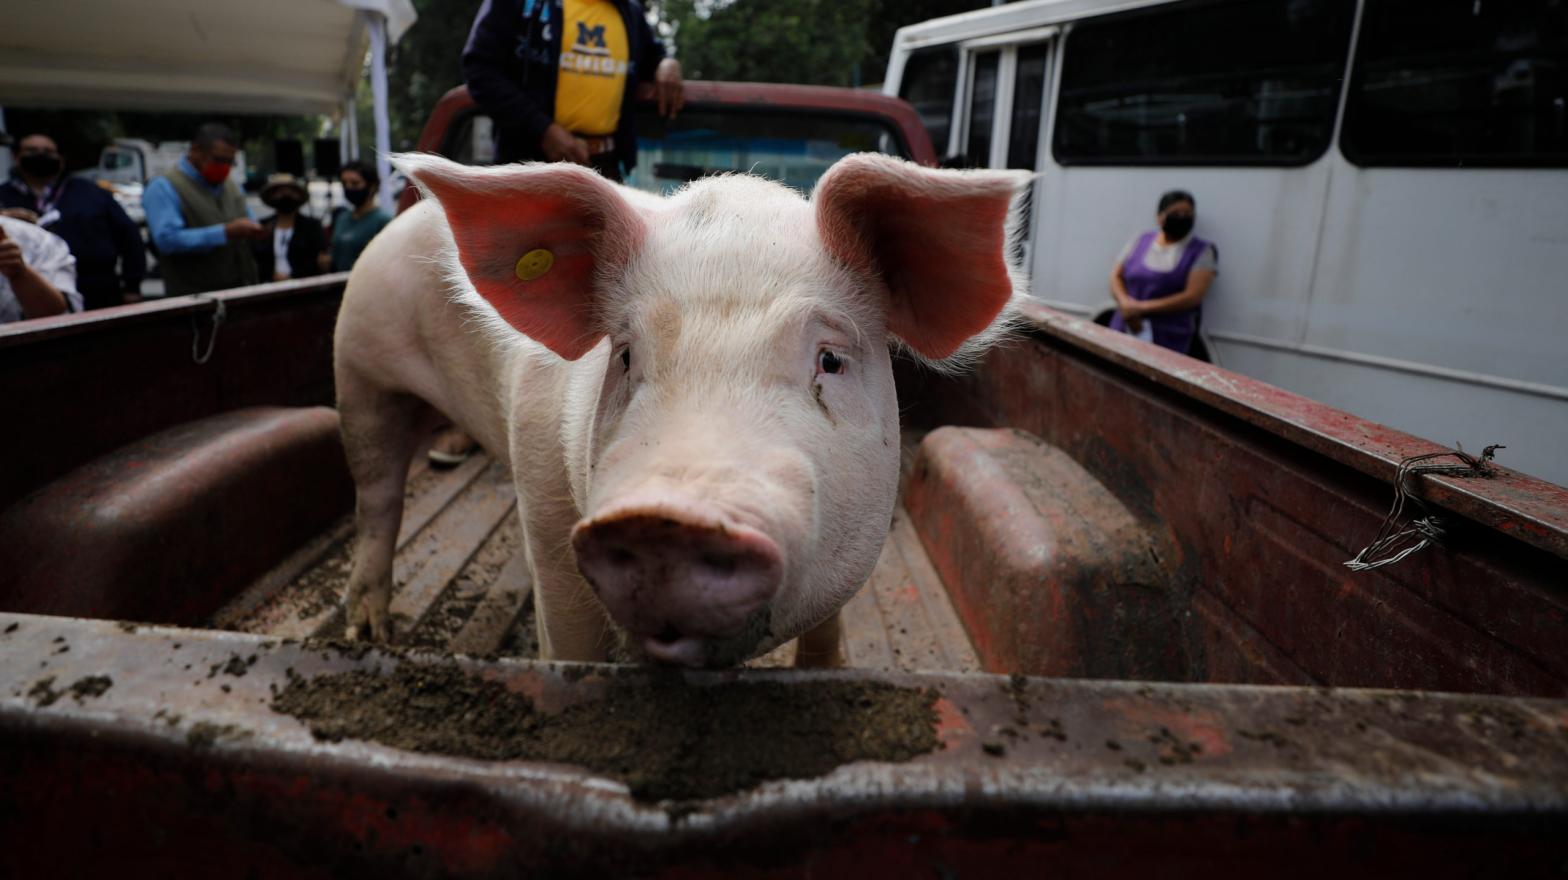 A female pig on a truckbed in Mexico City, Mexico. (Photo: Rebecca Blackwell, AP)